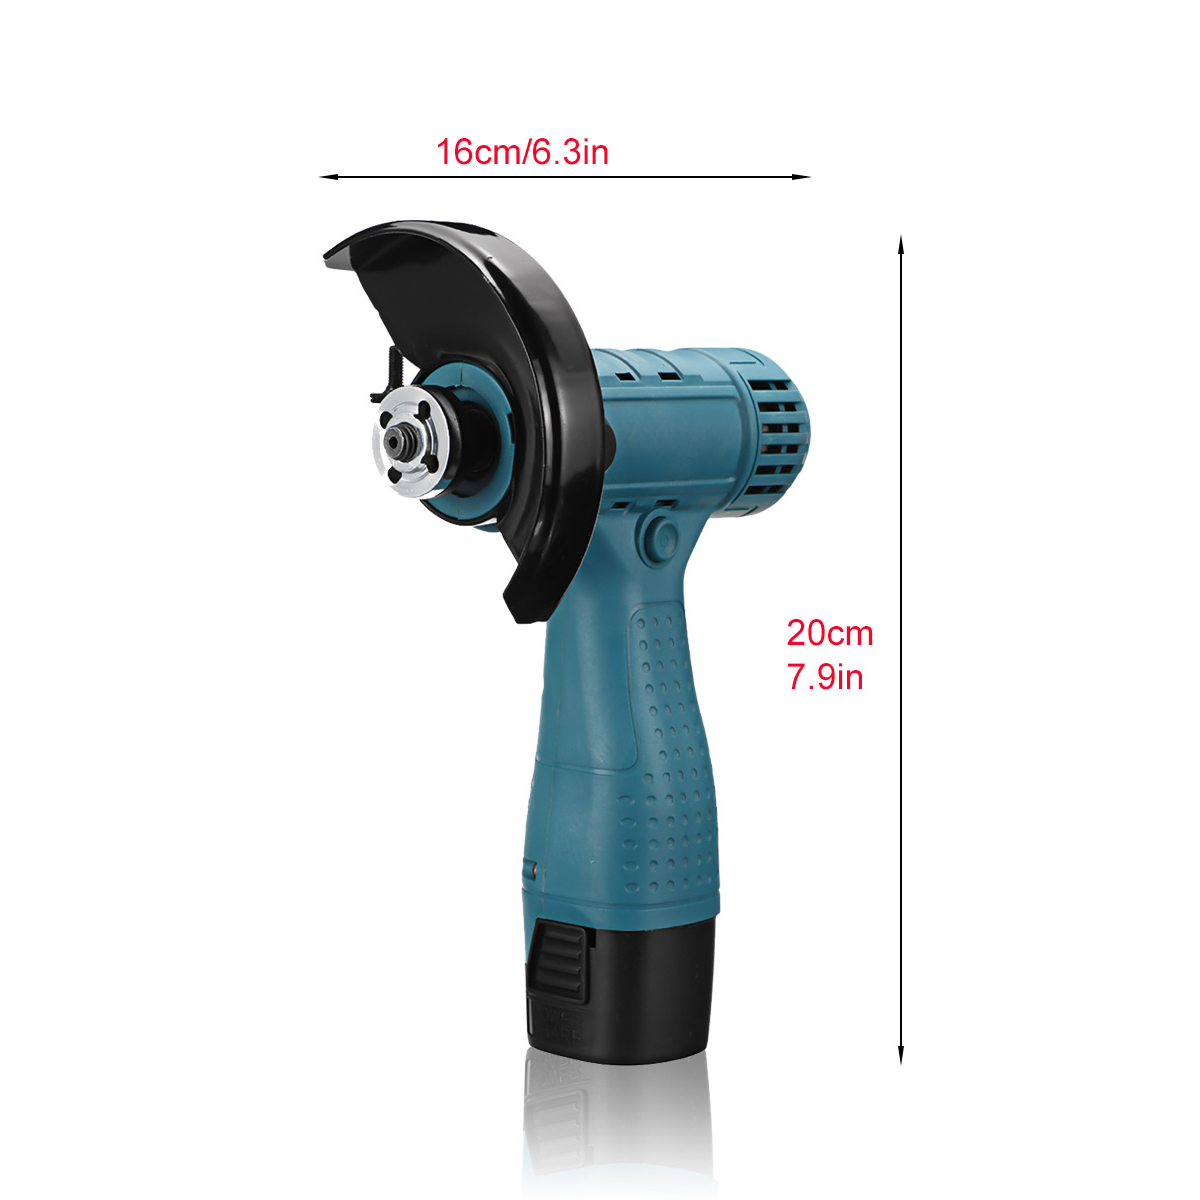 Electric-Angle-Grinder-Cutting-Grinding-Sander-Sandering-Machine-Corded-Replace-Tool-For-Makita-18V--1899835-7